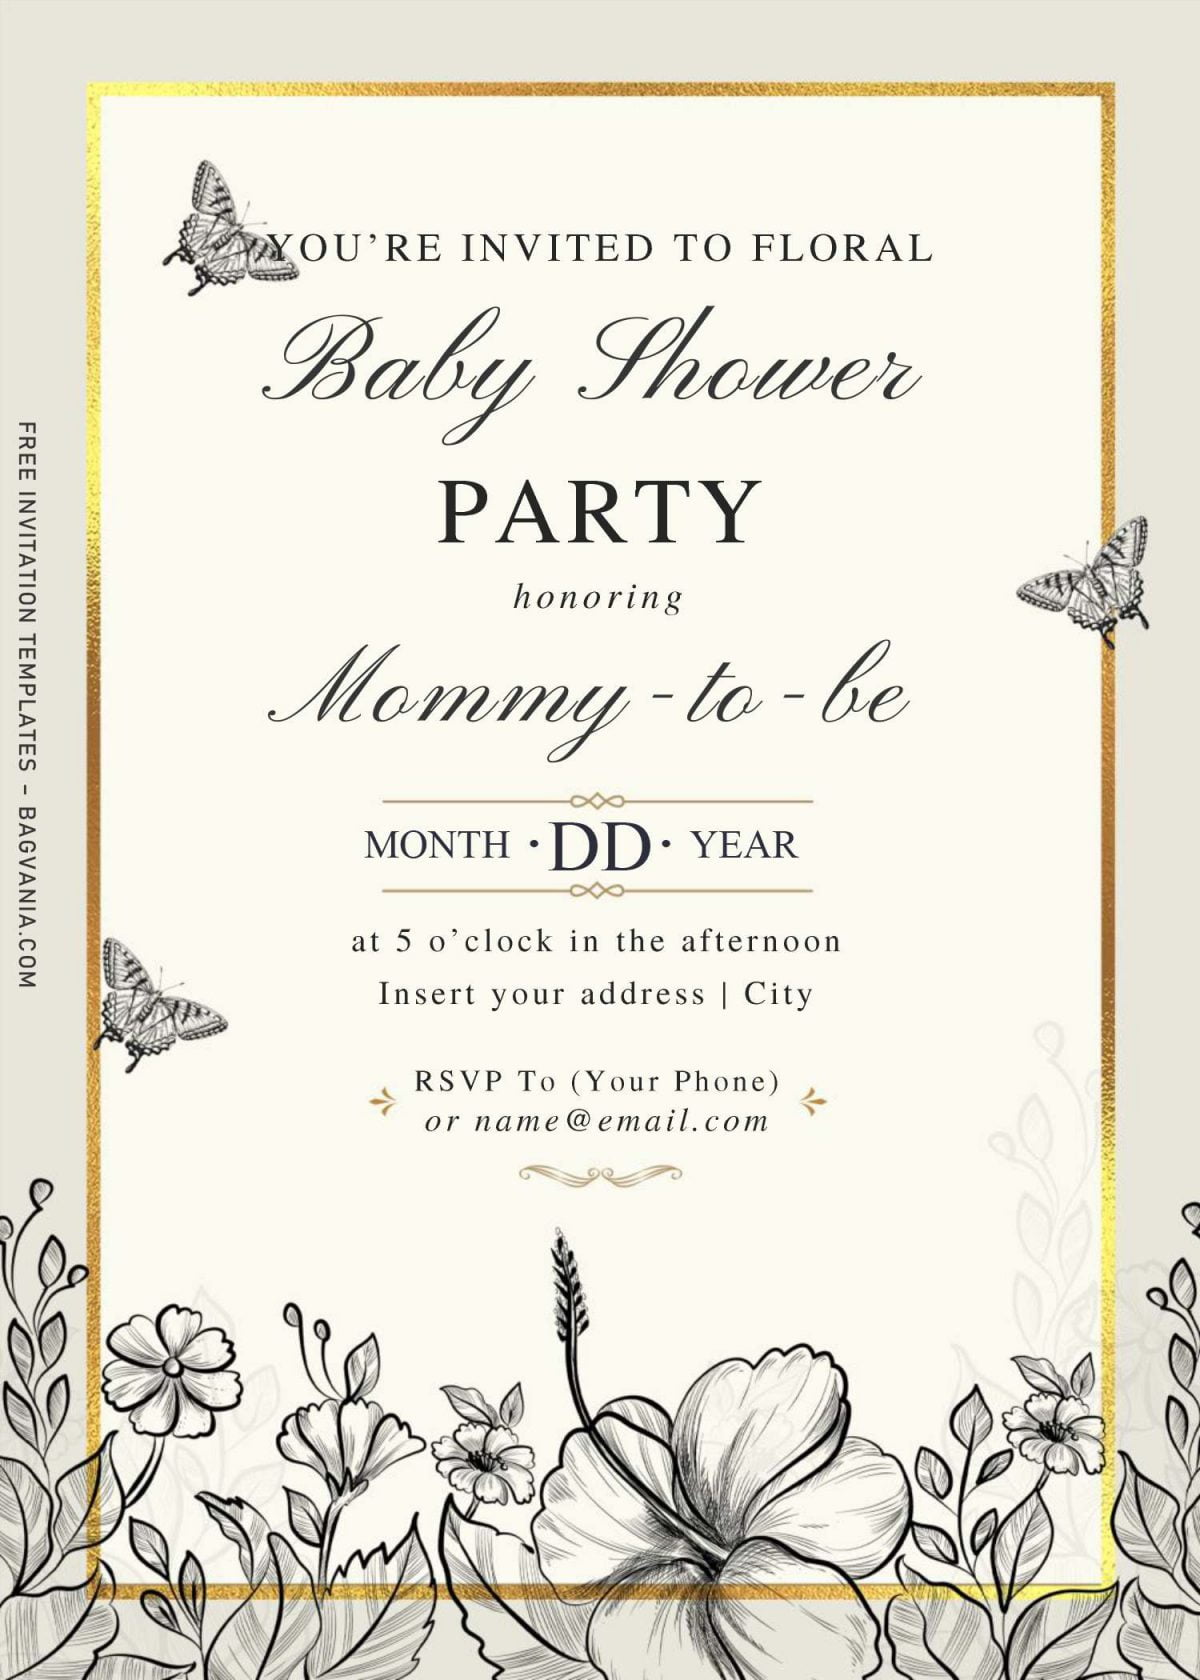 Free Hand Drawn Vintage Floral Wedding Invitation Templates For Word and has hand drawn butterflies